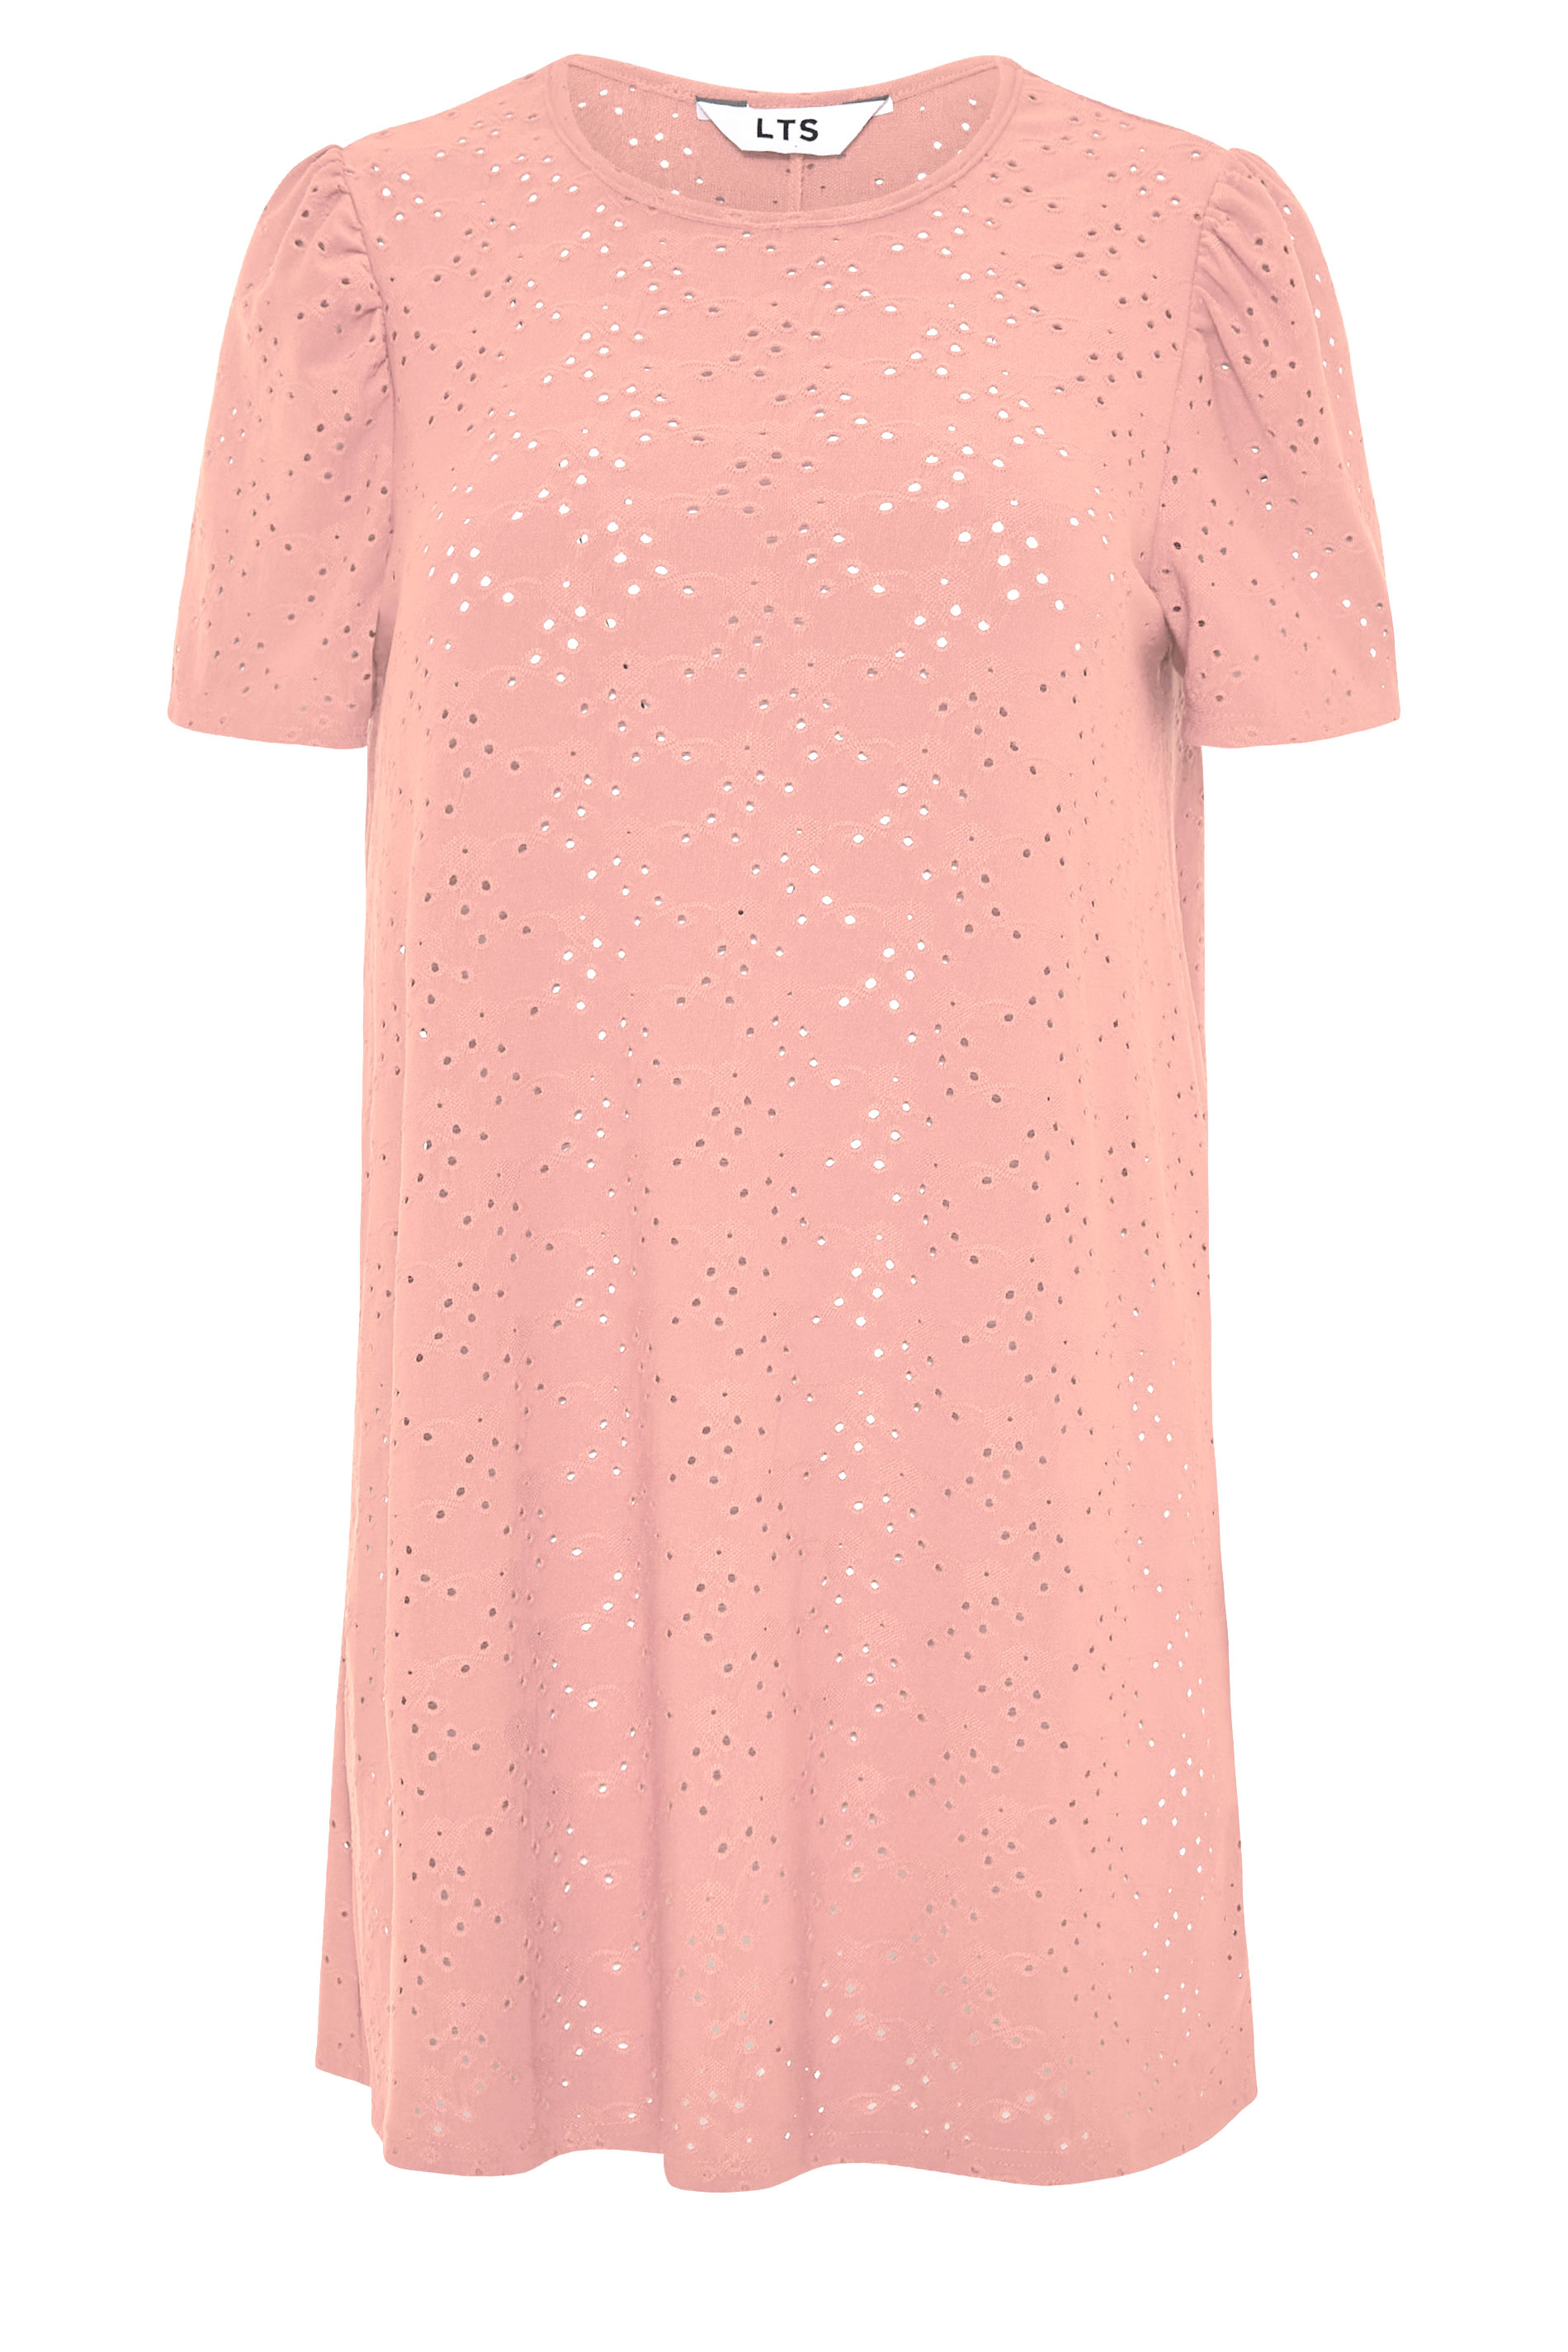 LTS Rose Pink Broidery Puff Sleeve Top| Long Tall Sally | Long Tall Sally